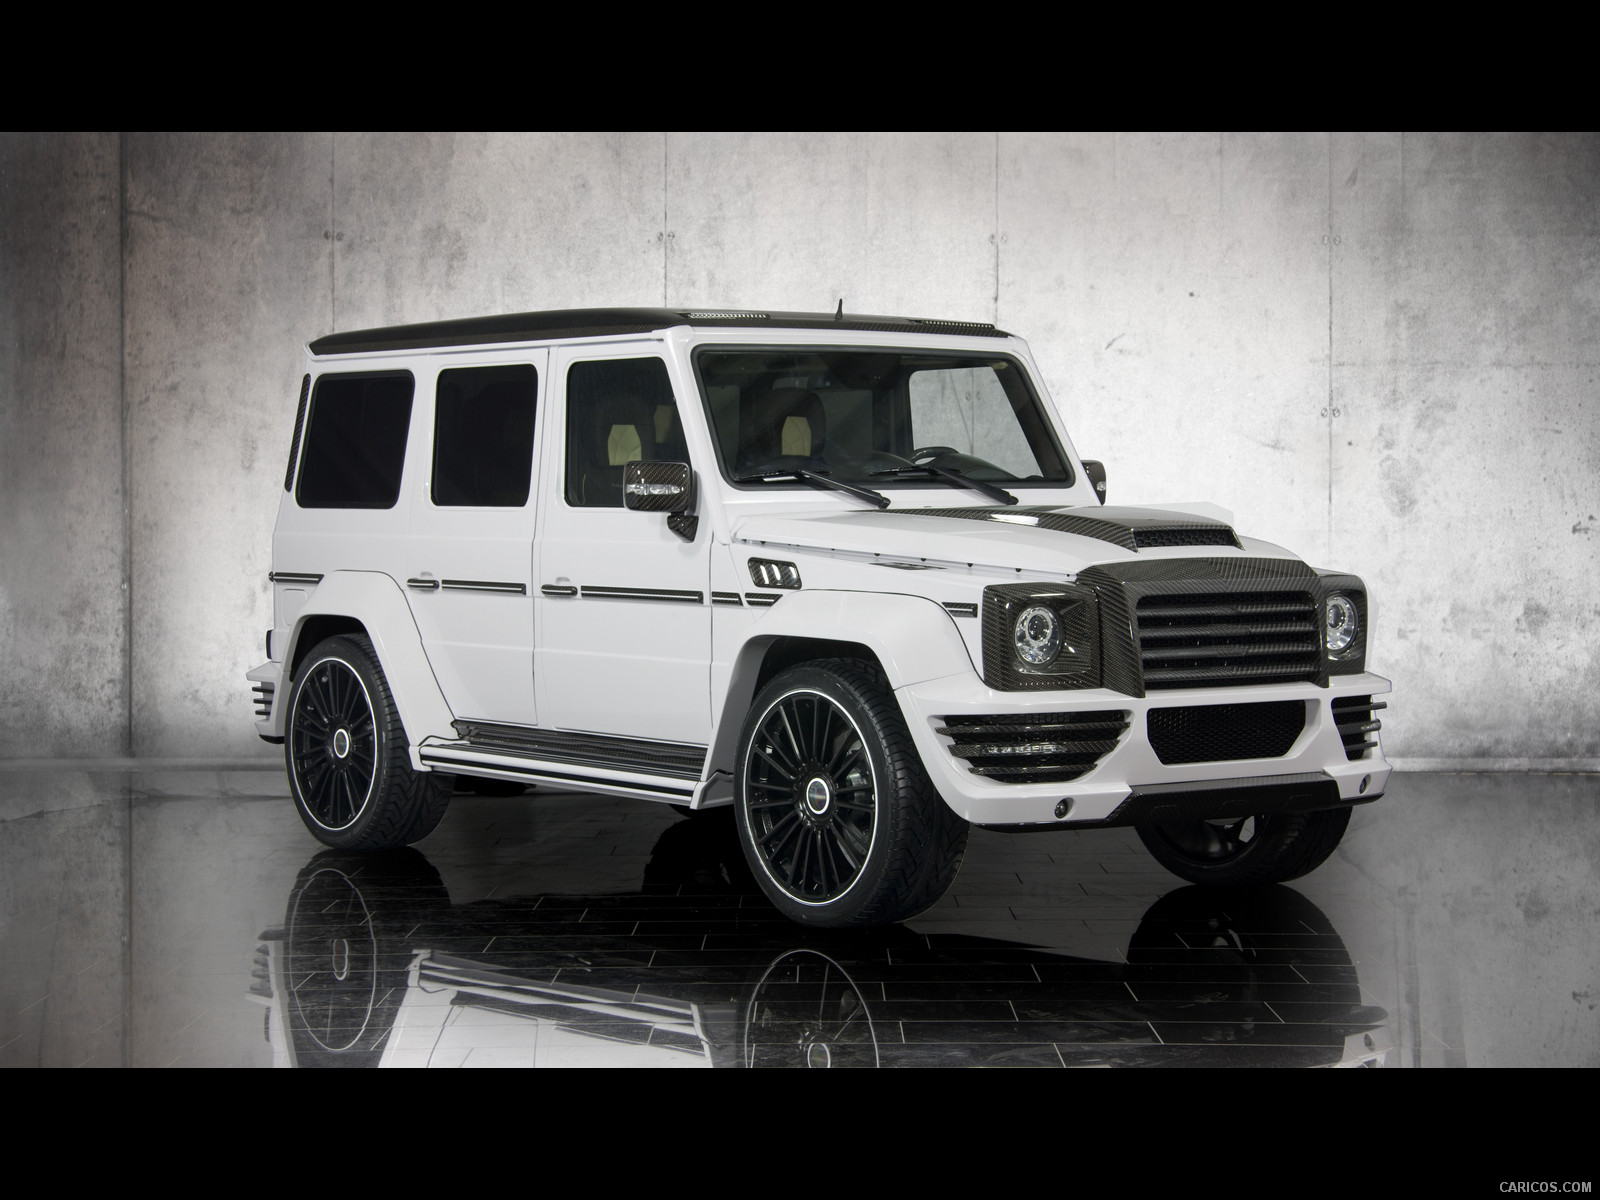 Mansory G-Couture based on Mercedes G-Class White - Front, #16 of 39